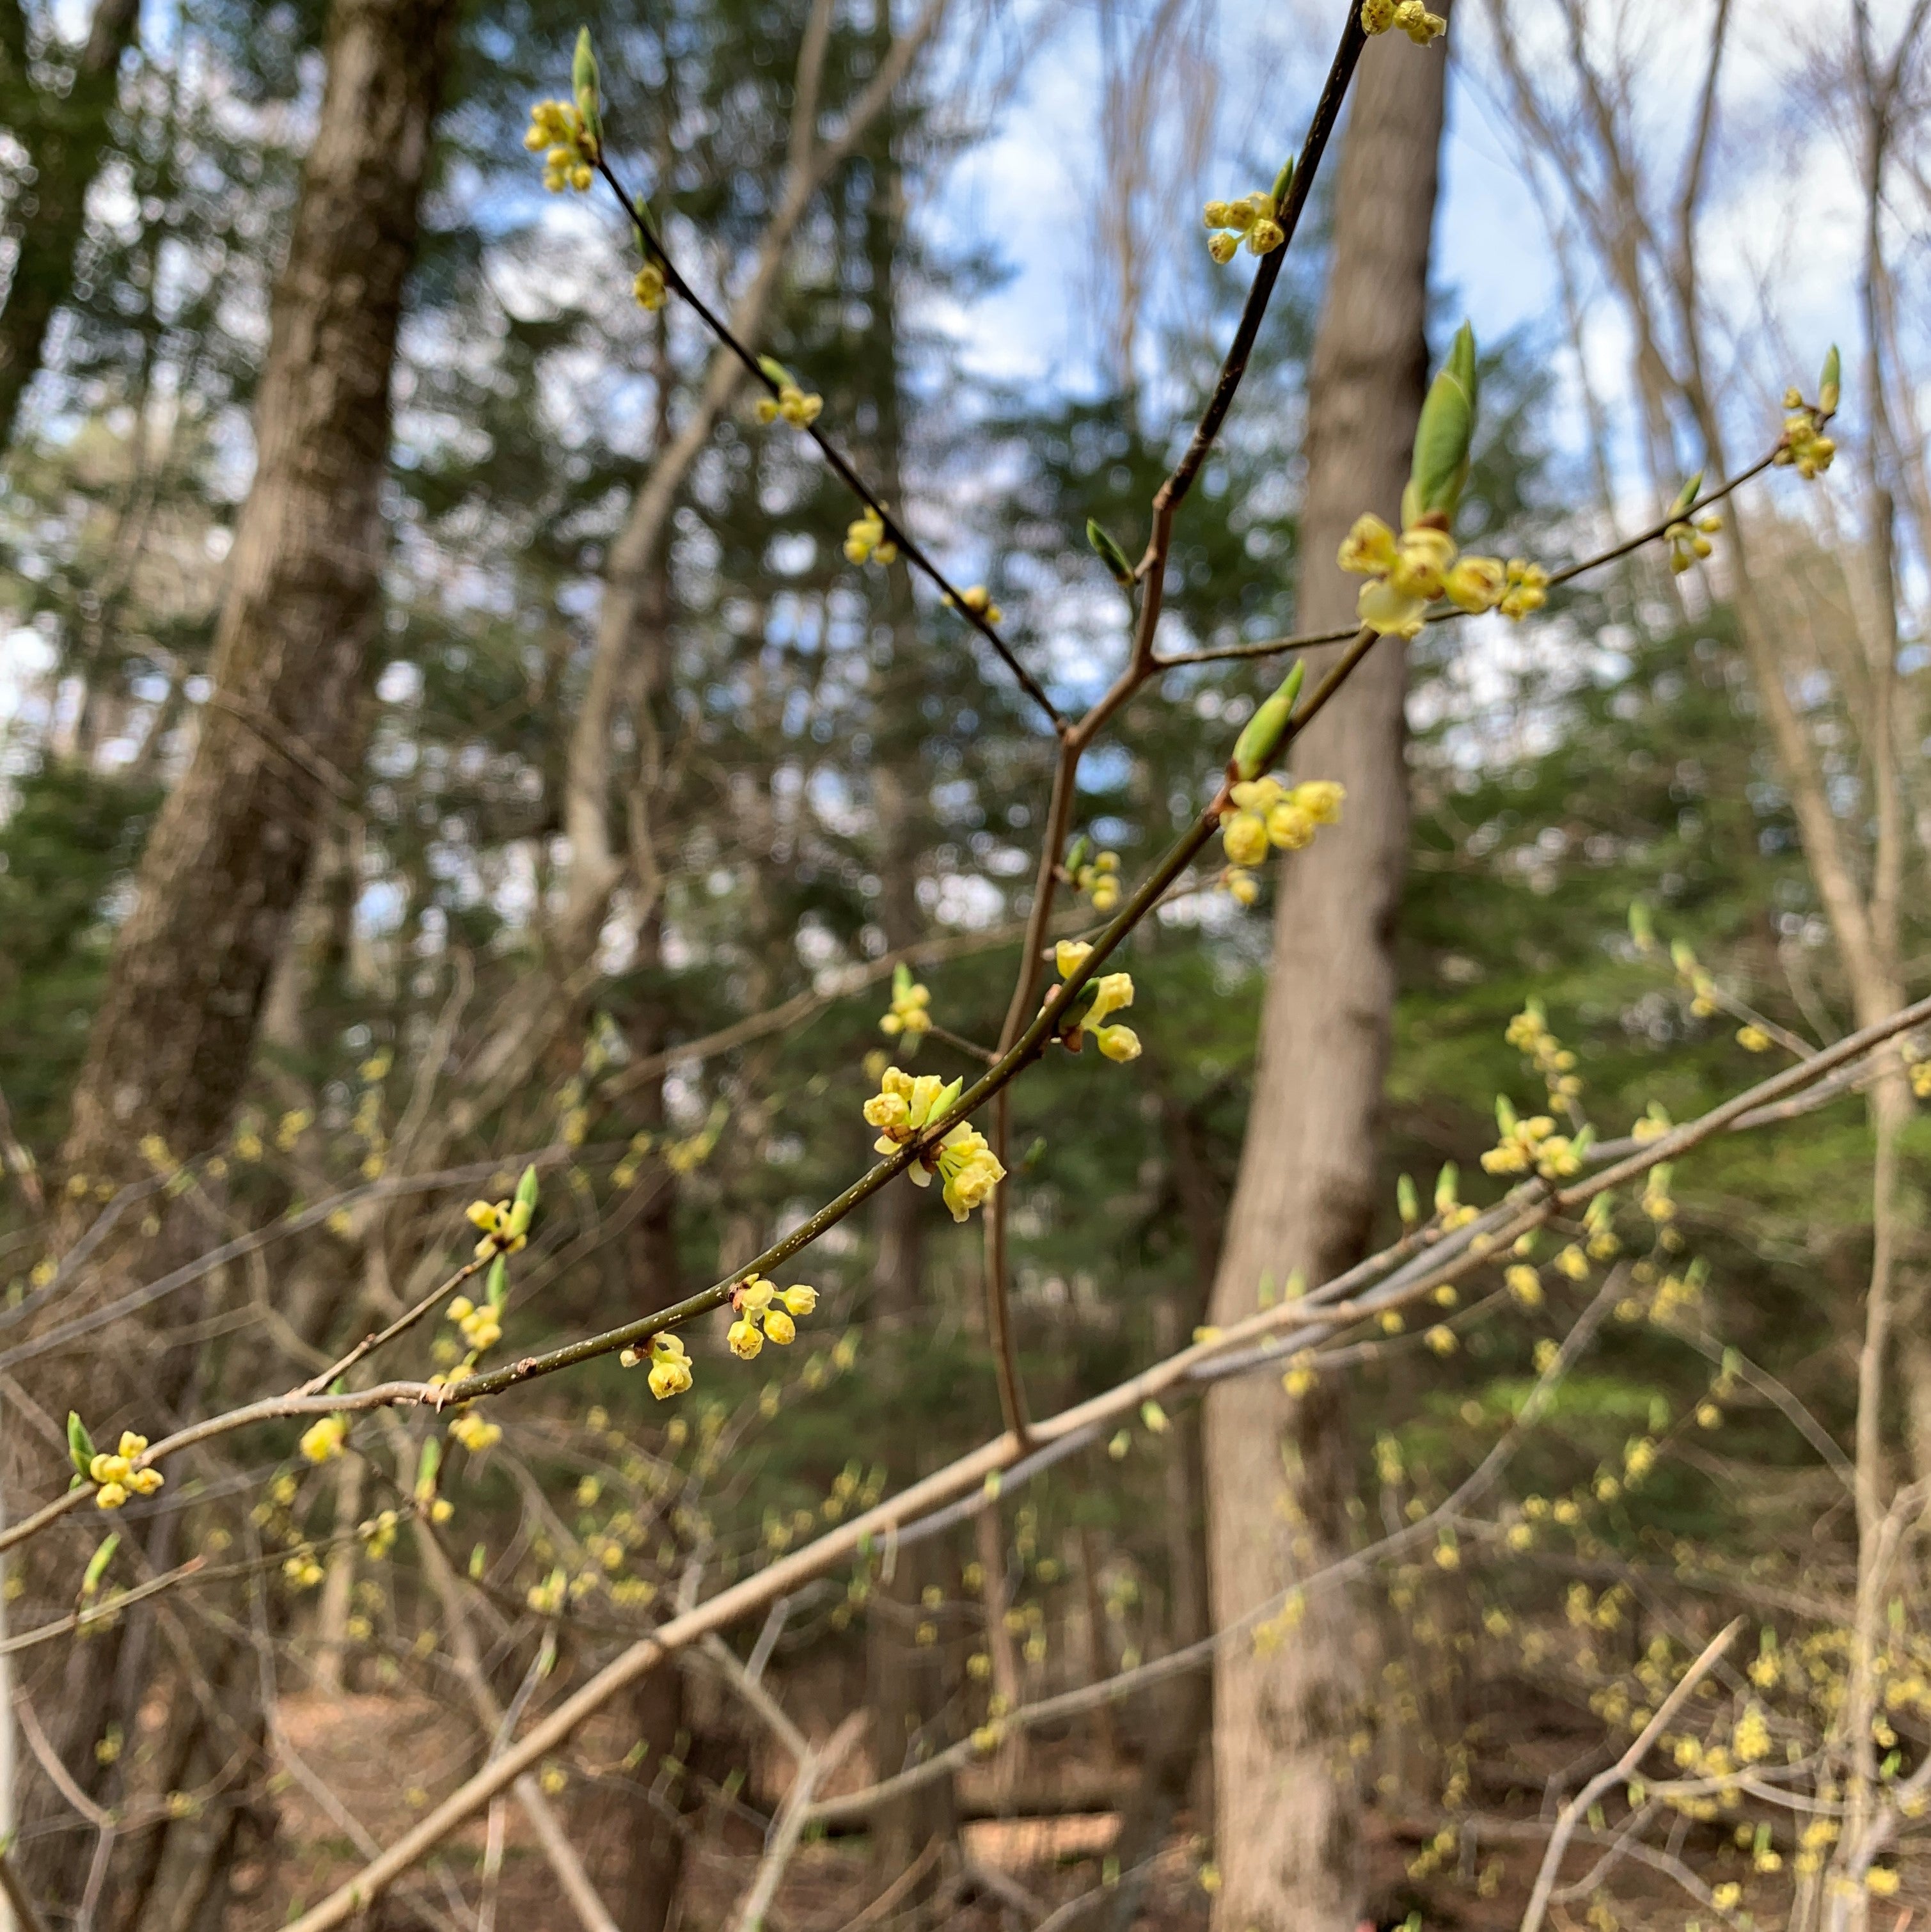 Spicebush is a North American native shrub with tiny yellow flowers in early spring.